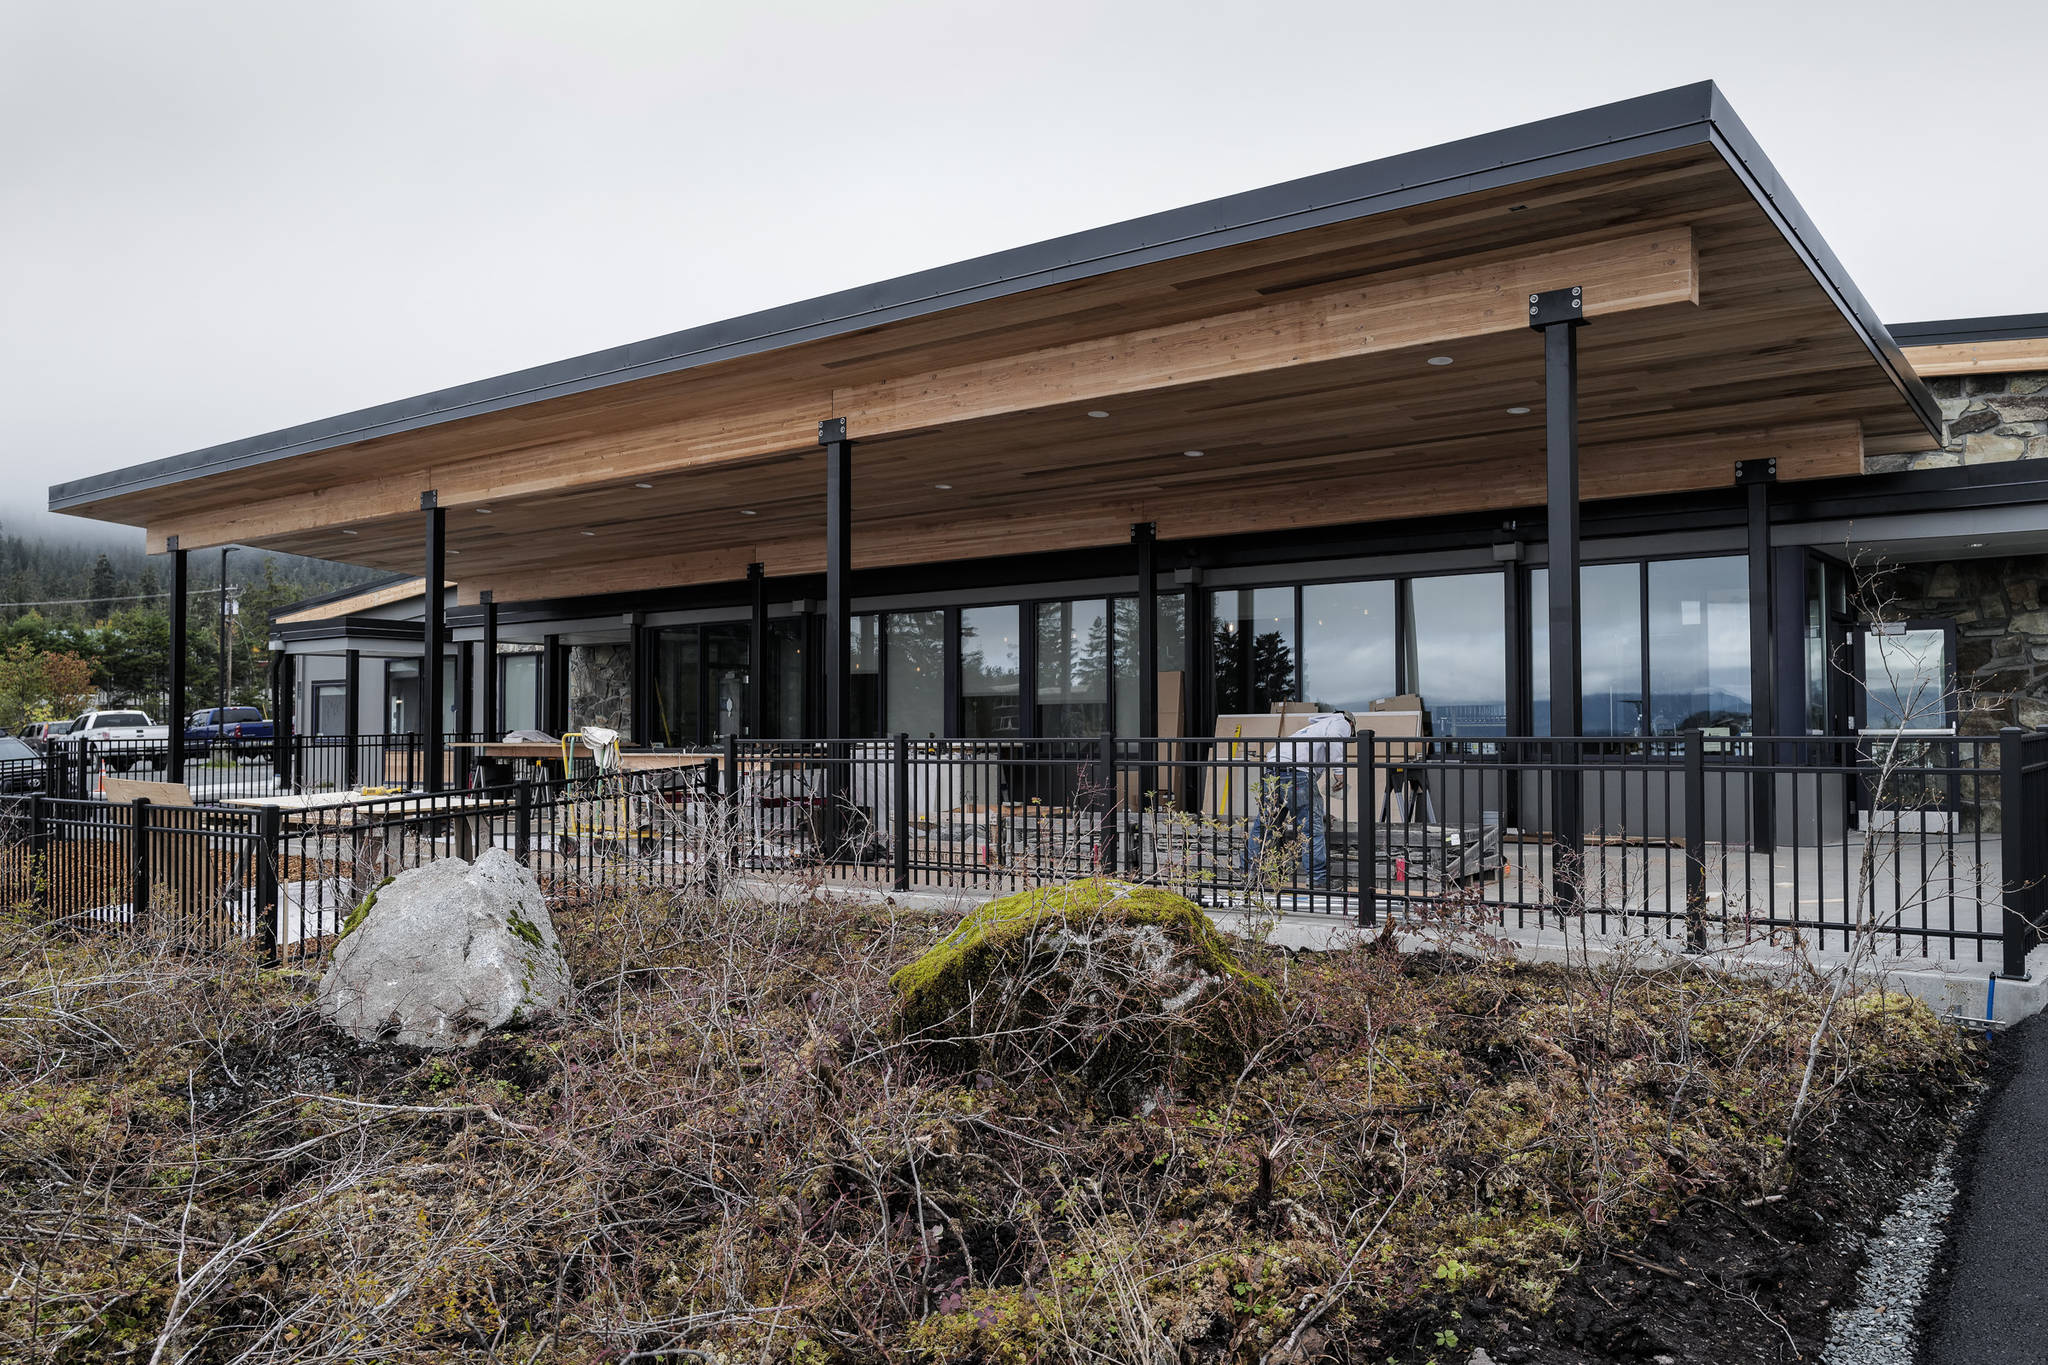 Work at the Forbidden Peak Brewery is nearly complete on Thursday, Oct. 3, 2019. The Auke Bay brewery is to open Saturday, Oct. 12. (Michael Penn | Juneau Empire)